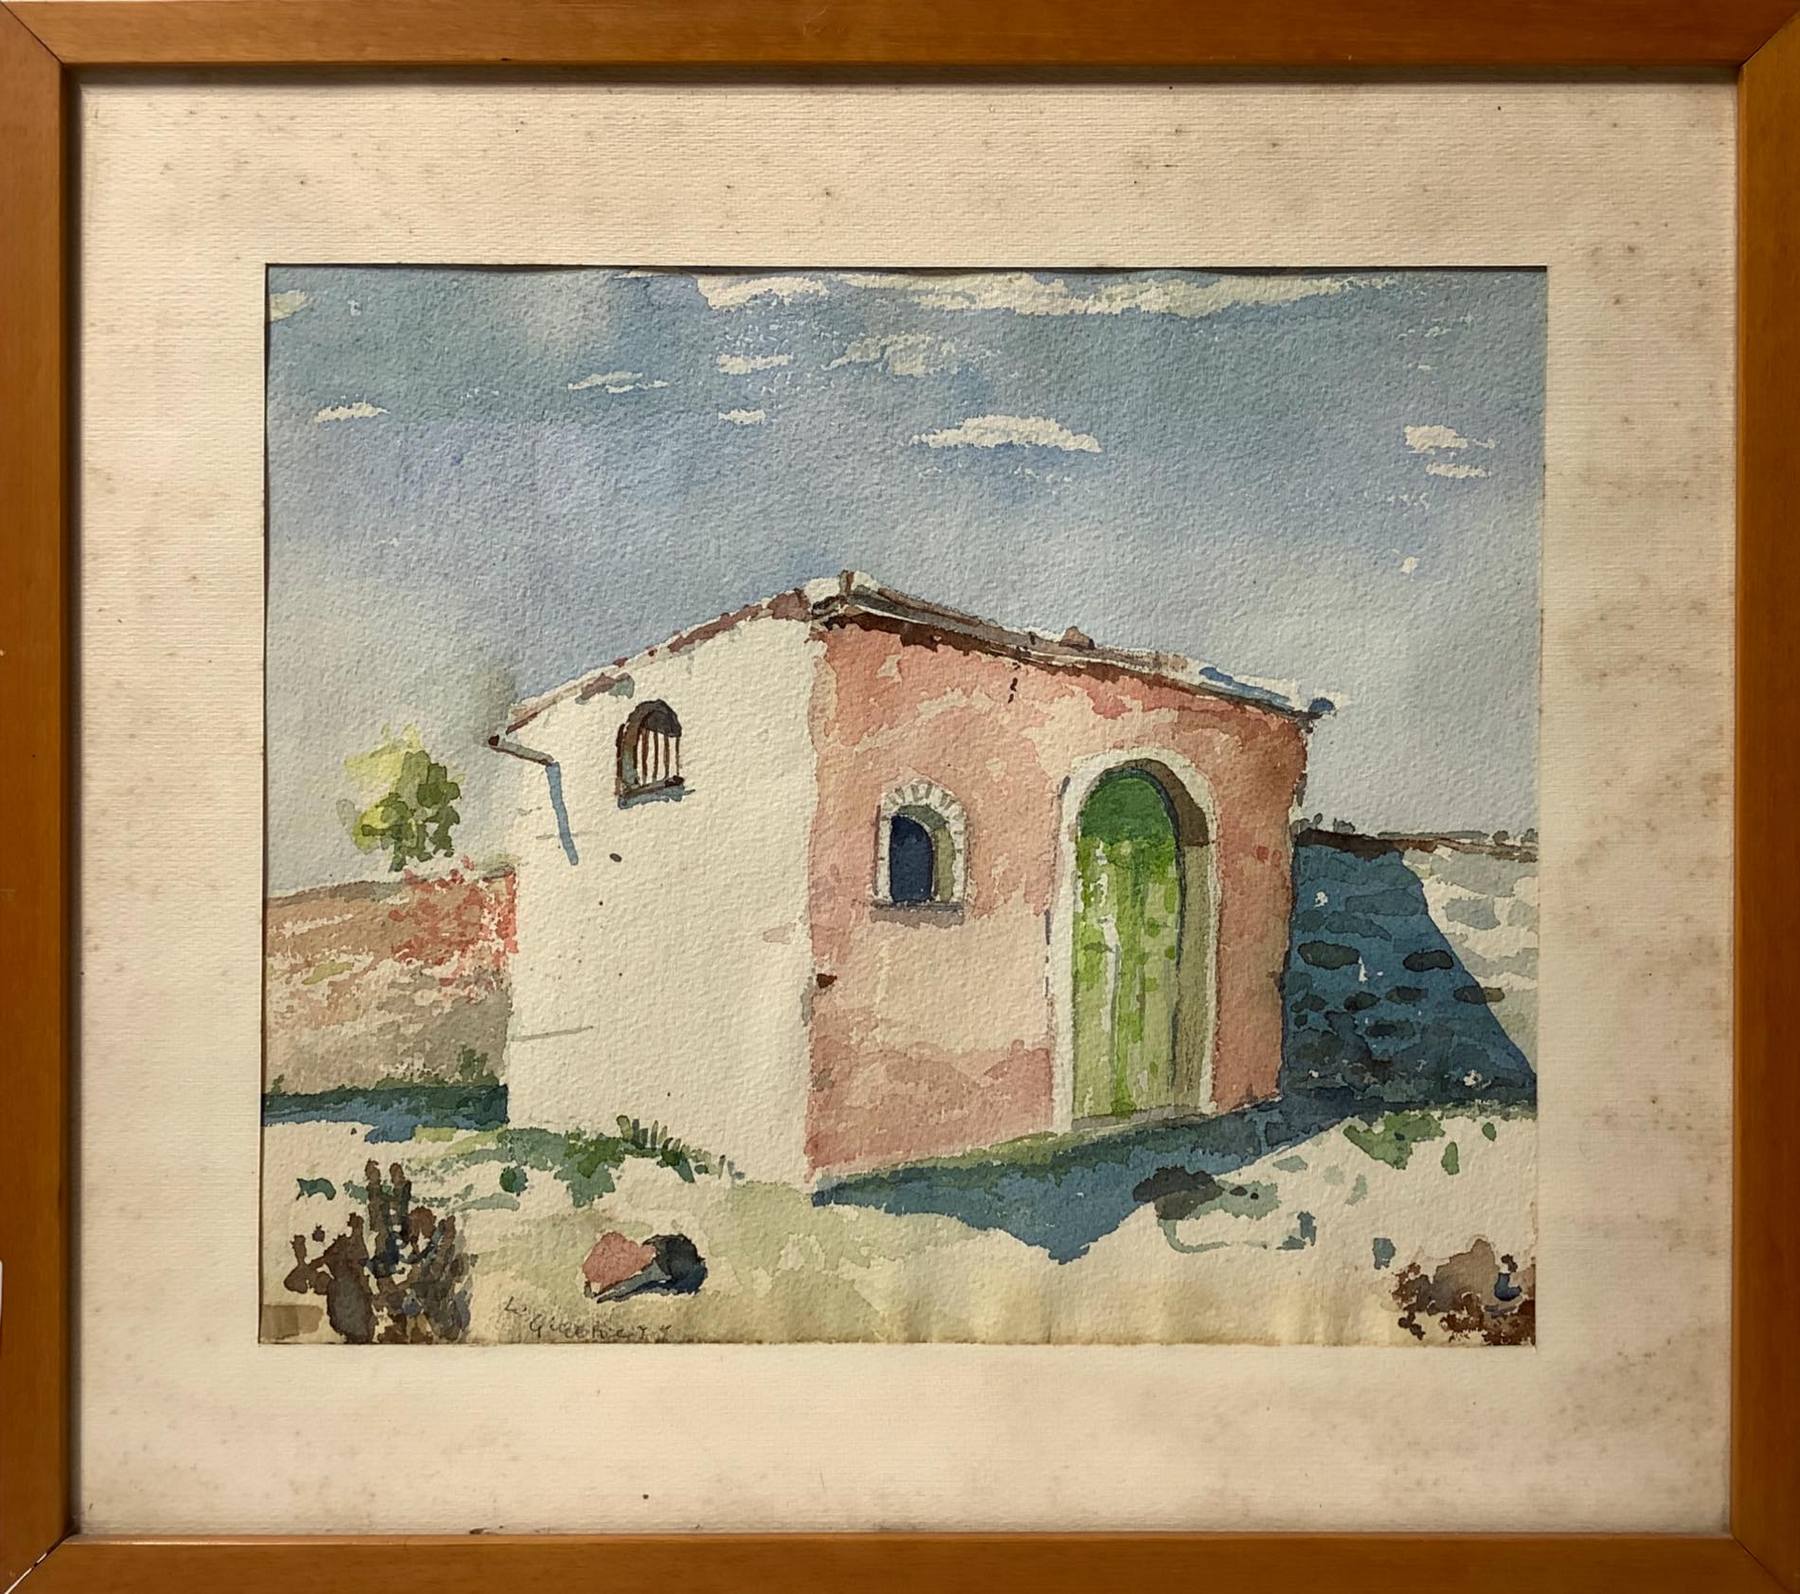 Watercolor on paper depicting Aeolian house. Lily Giachery (England 1907 - Taormina 1994). Cm 29x30, - Image 2 of 4